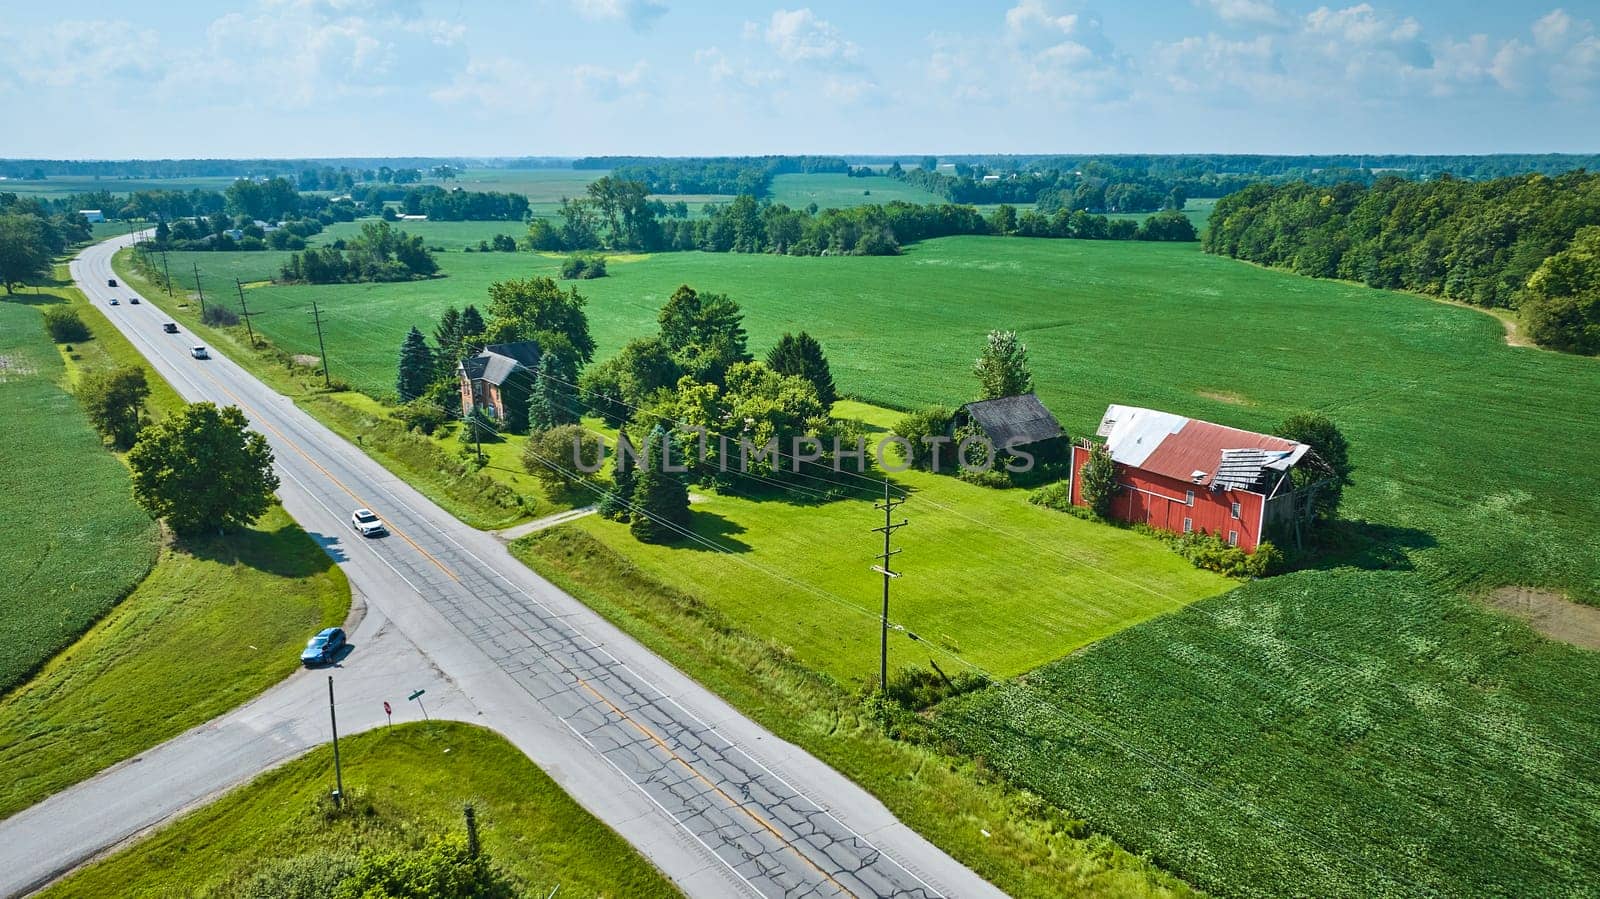 Image of Aerial farmland with road beside it and two decaying barns with soybean crops growing